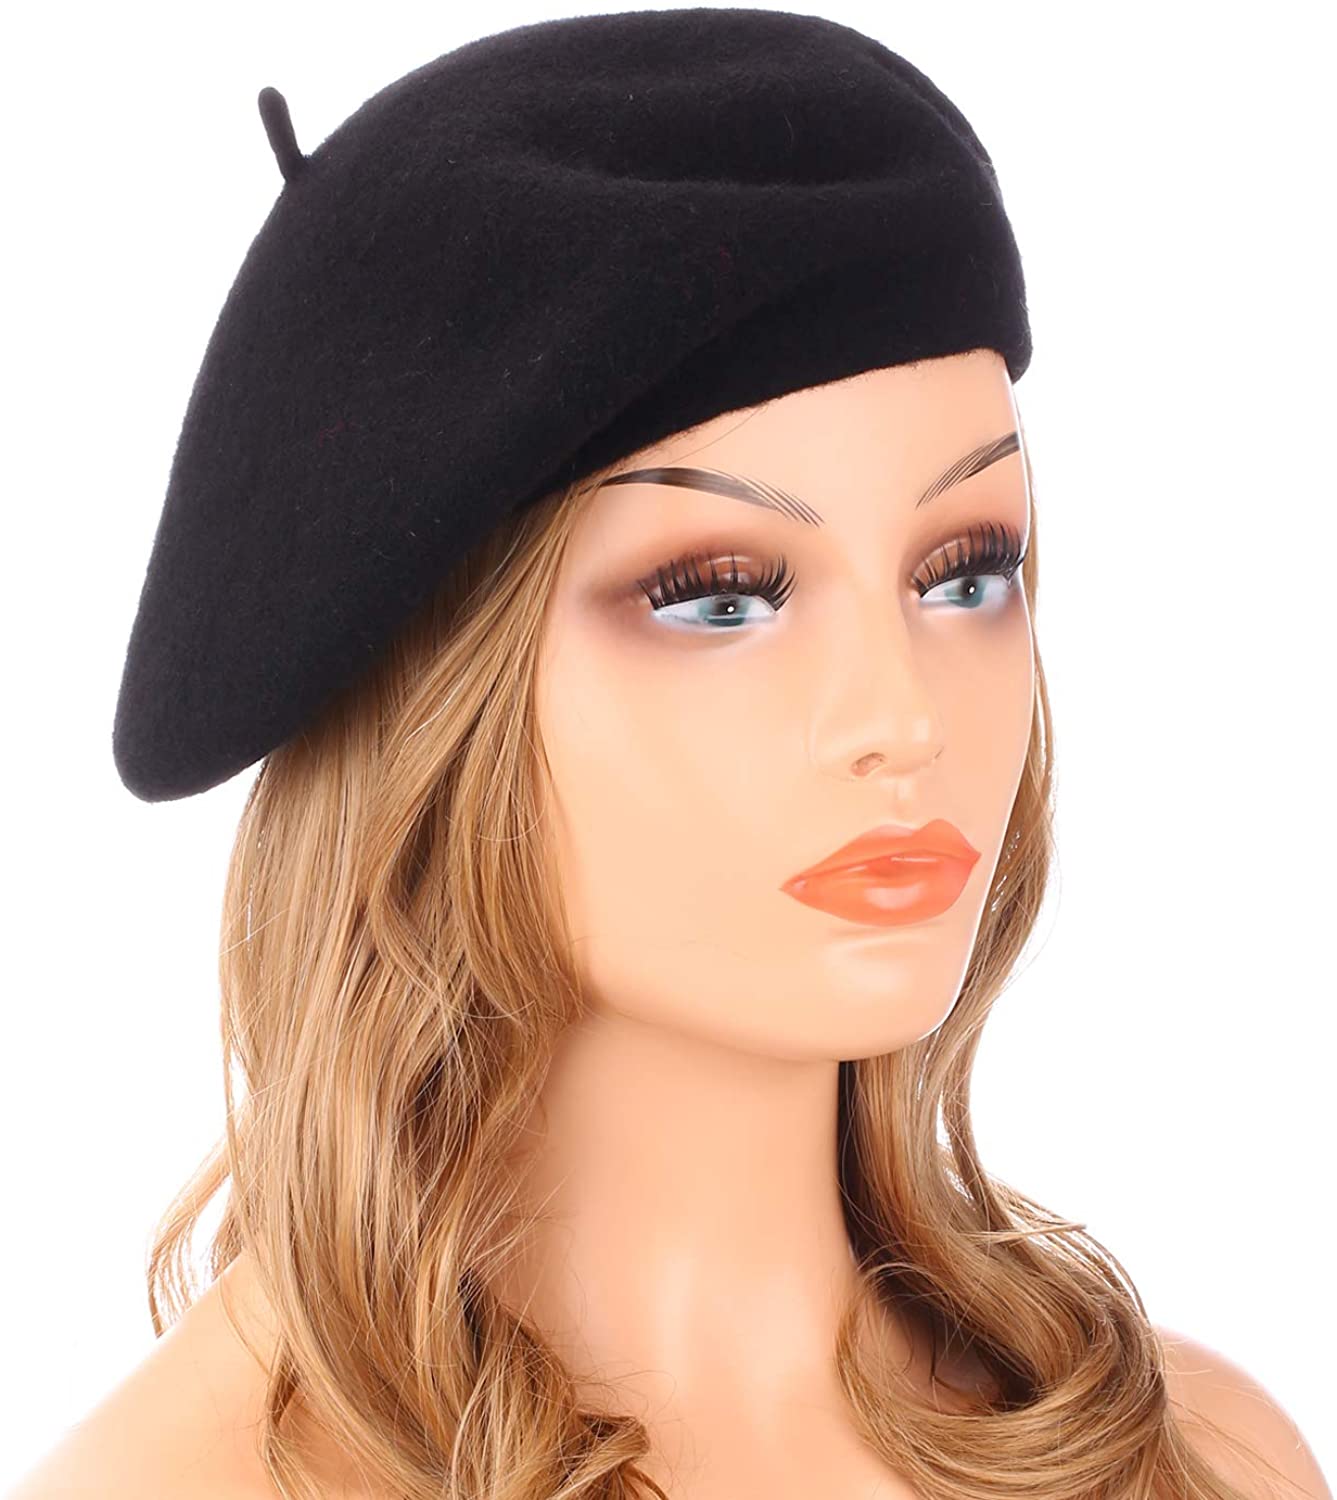 Wheebo Wool Beret Hat,Solid Color French Style Winter Warm Cap for Women Girls Lady